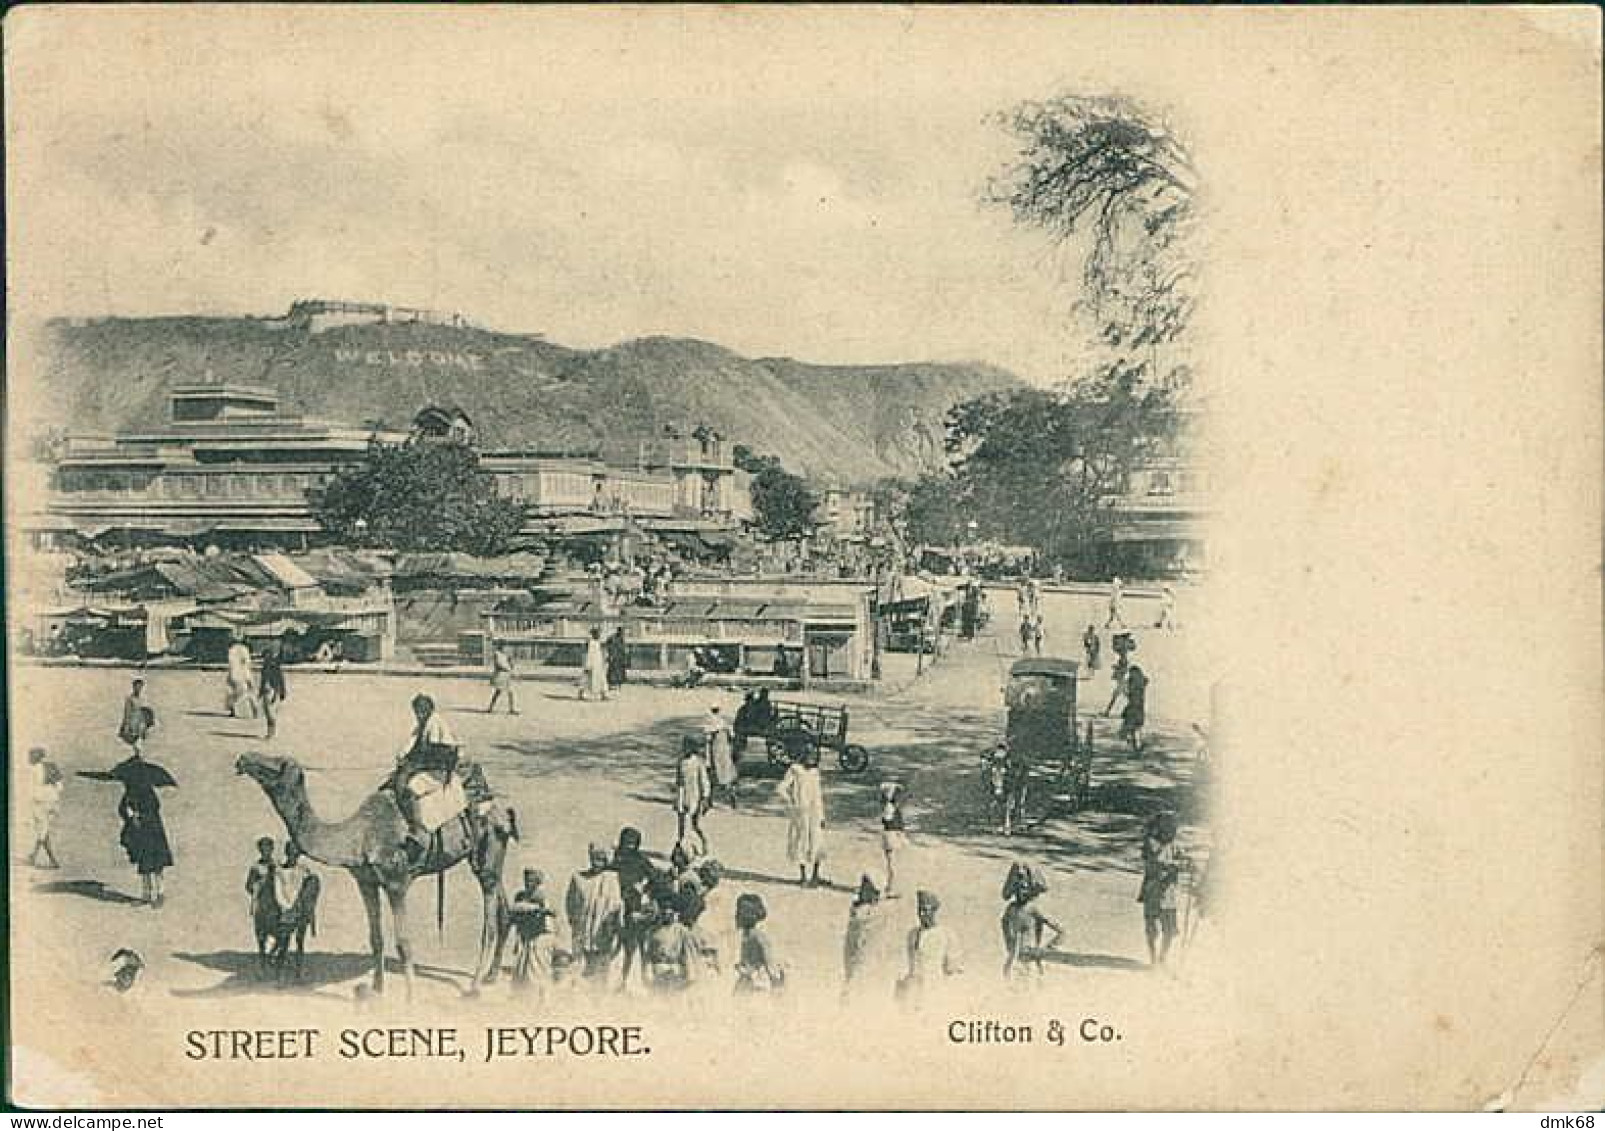 INDIA - STREET SCENE JEYPORE - EDIT CLIFTON & CO. - MAILED / STAMP - 1910s (18385) - India